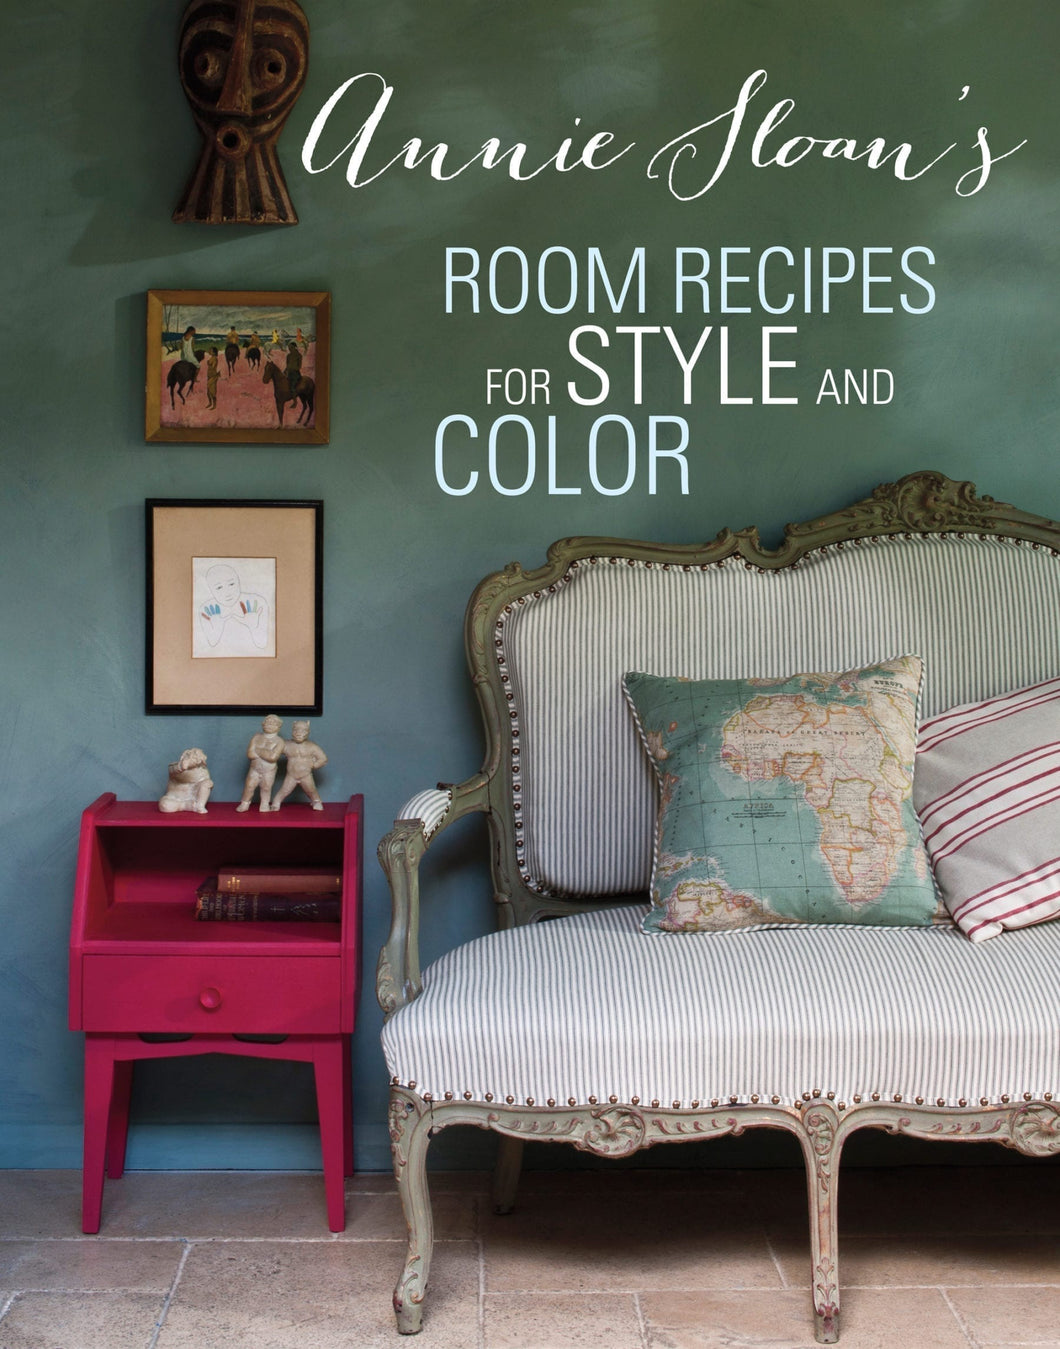 Annie Sloan’s Room Recipes